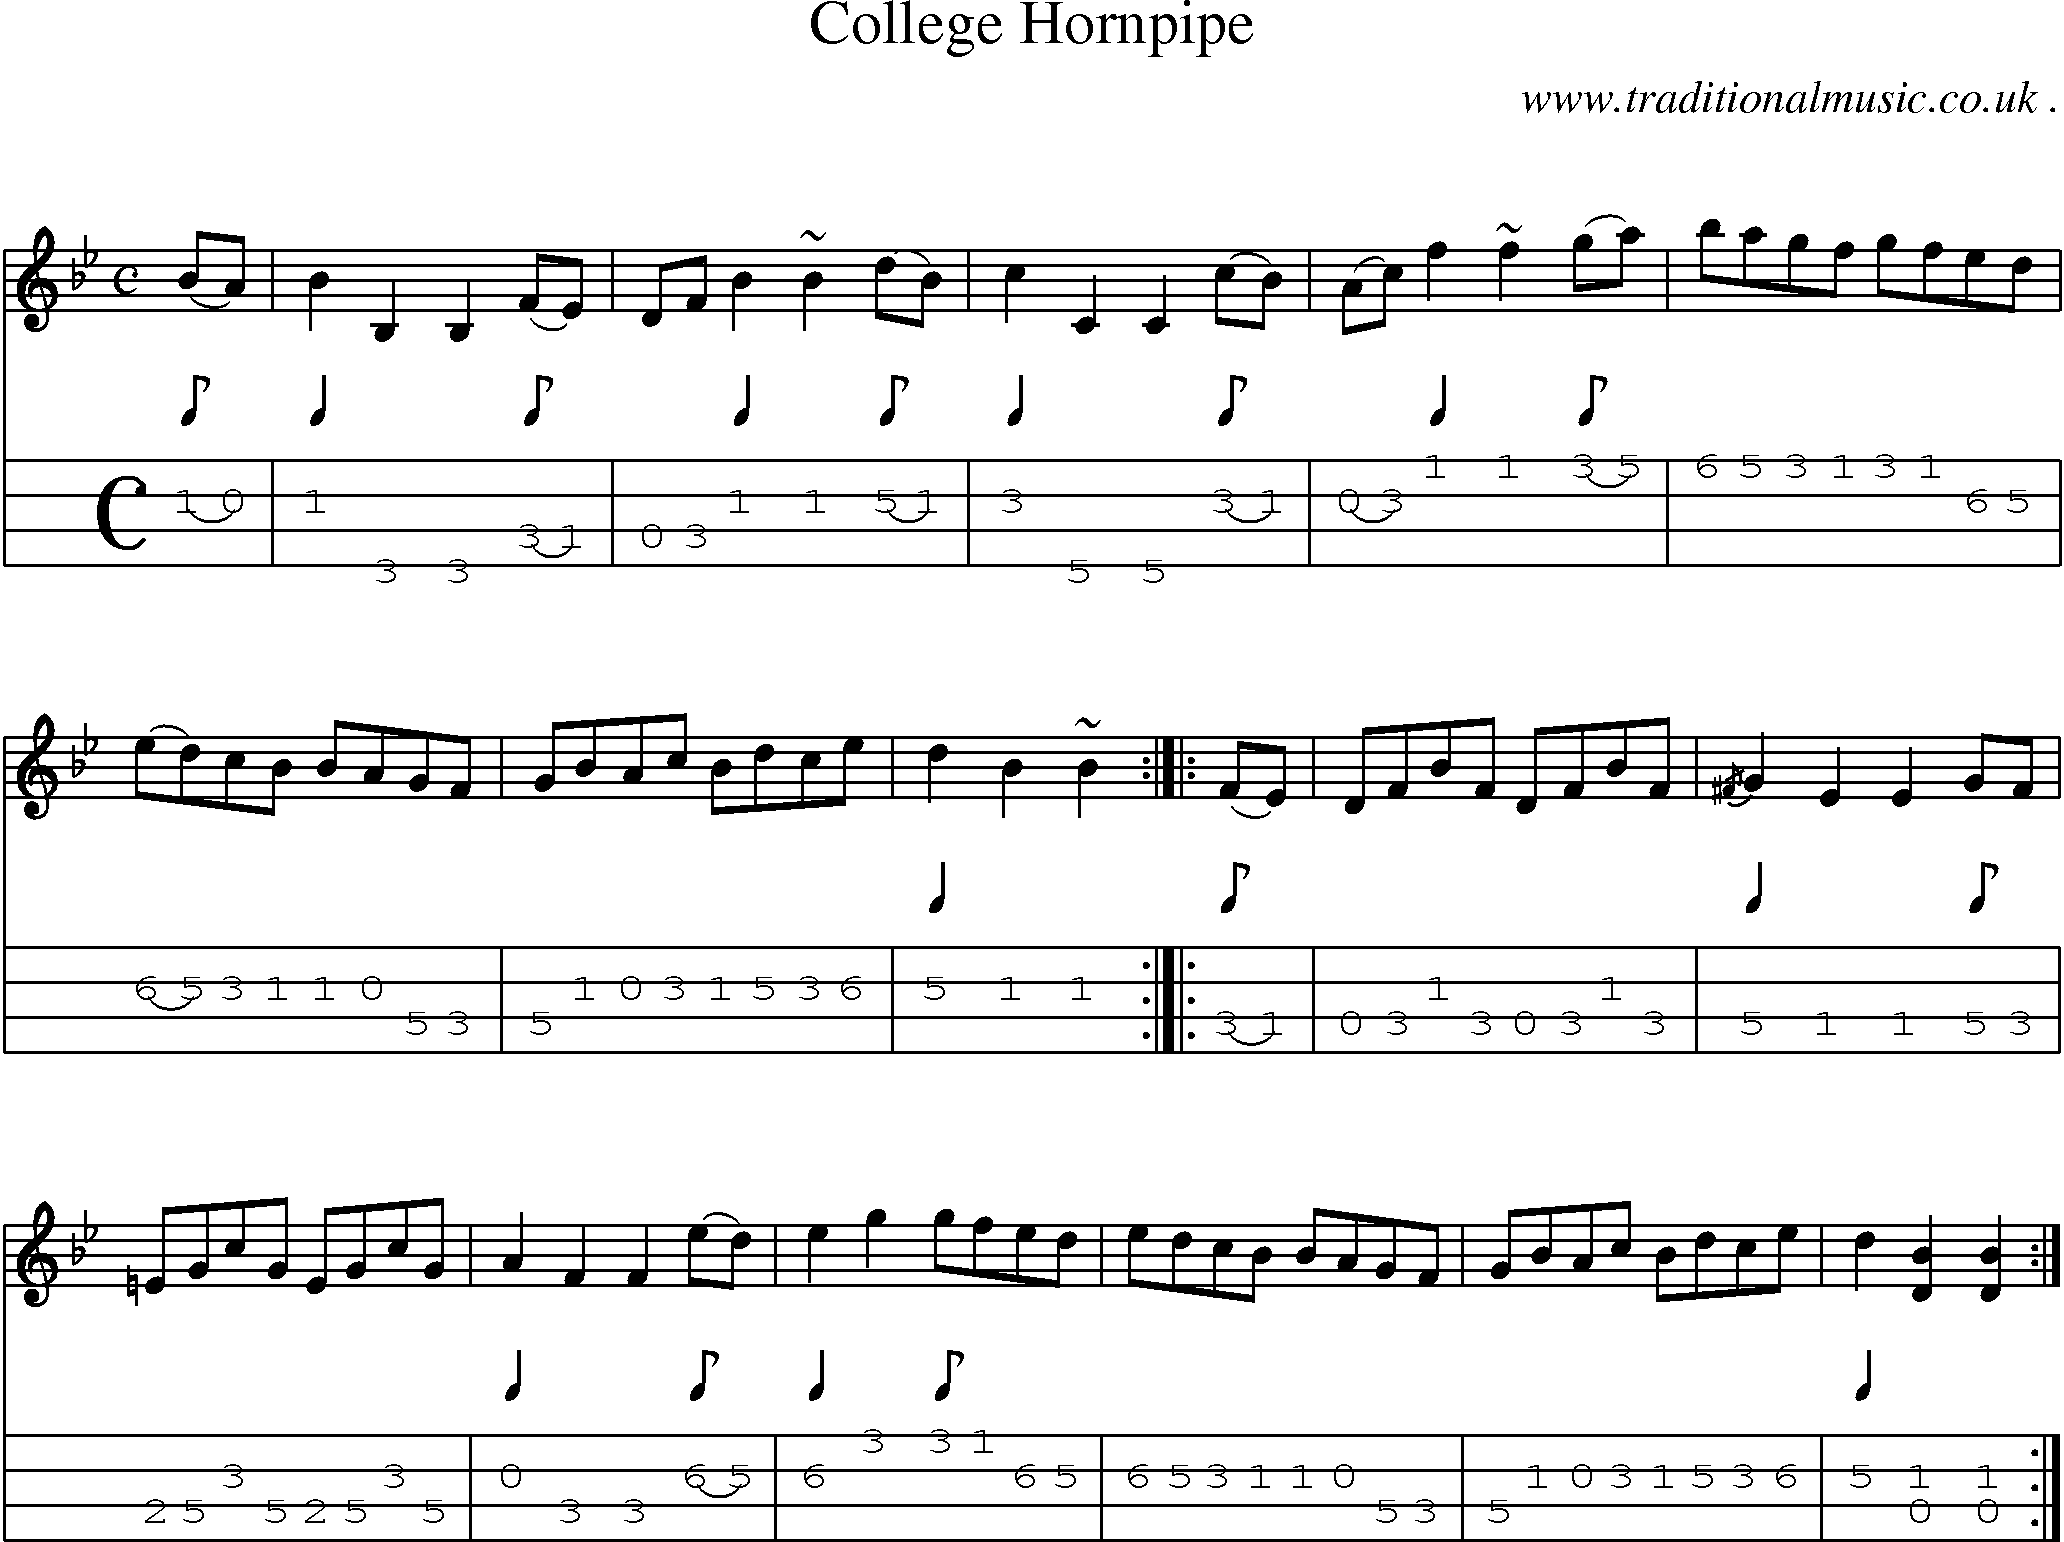 Sheet-music  score, Chords and Mandolin Tabs for College Hornpipe